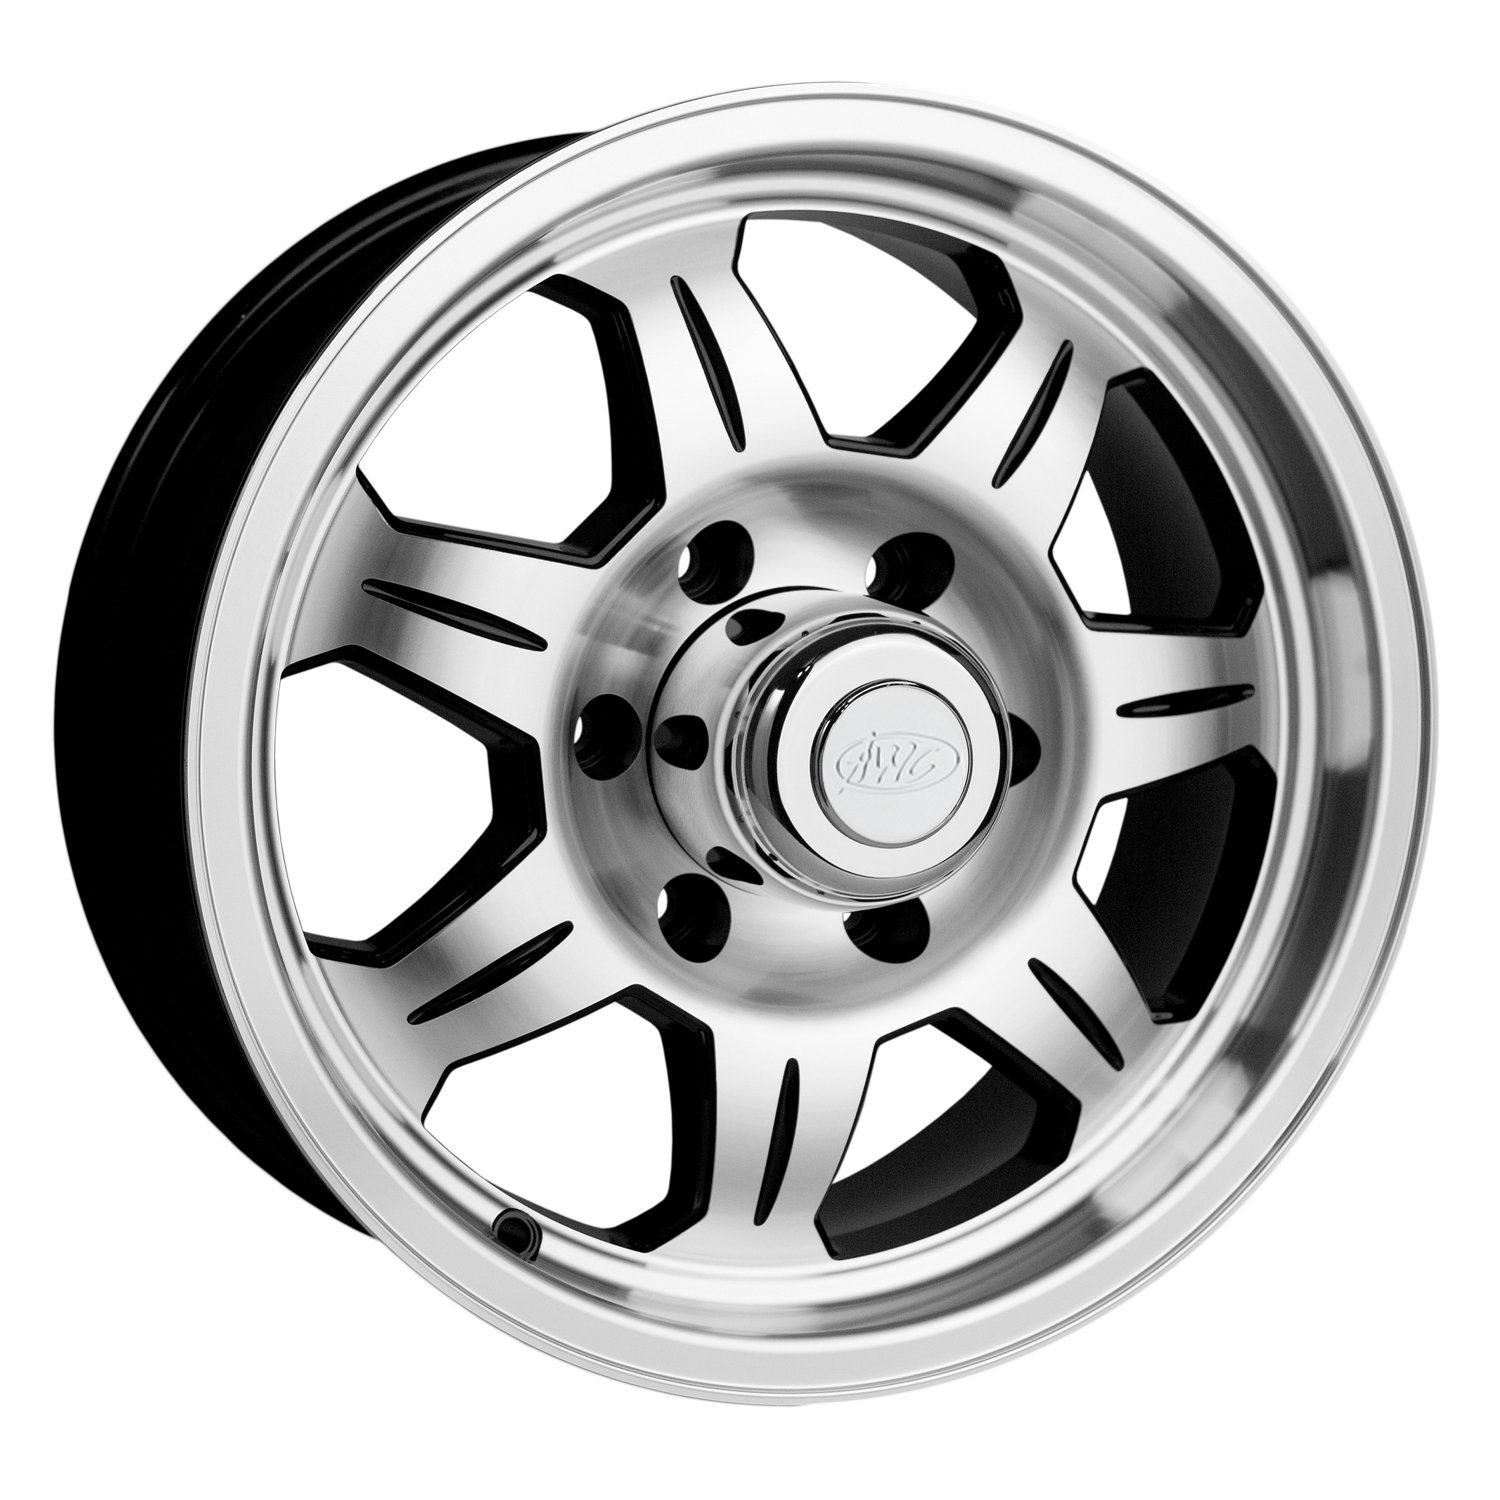 870 ELEMENT Trailer Wheel Size: 15 X 6" Bolt Pattern: 5 x 5.00" (127 mm) [Machined with Black Accents]